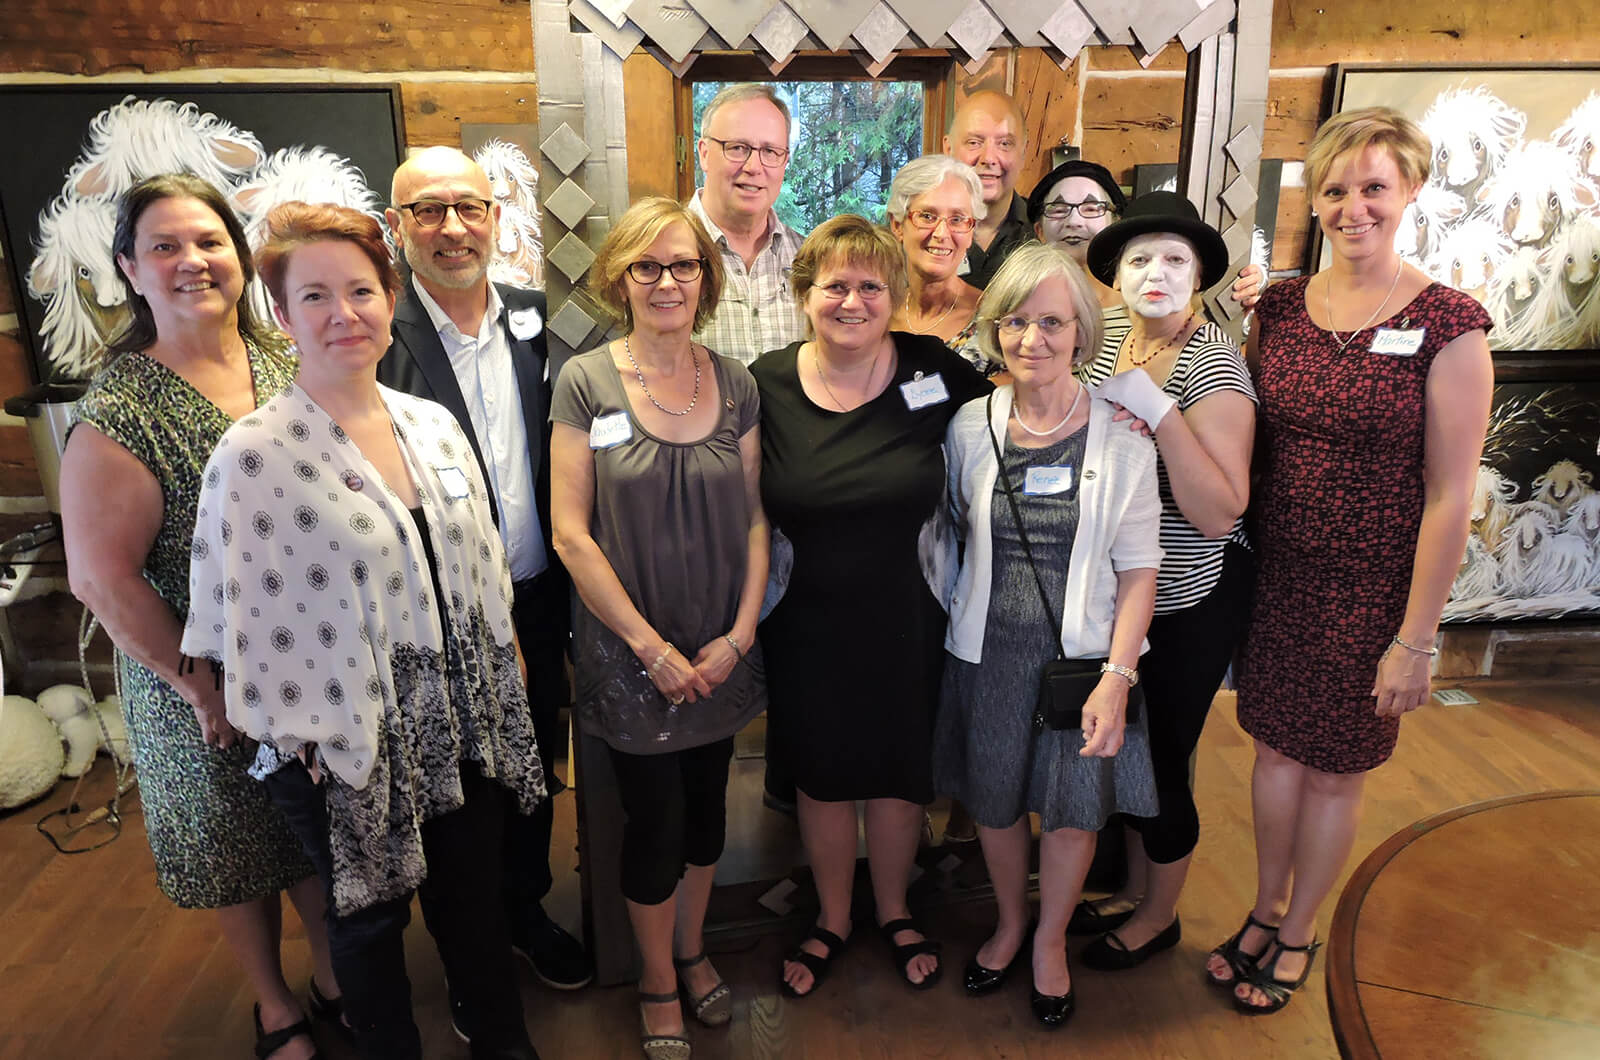 Members of Toastmasters des Laurentides club in Quebec, Canada, host an open house in the Art Gallery Béliveau for their 15th anniversary.